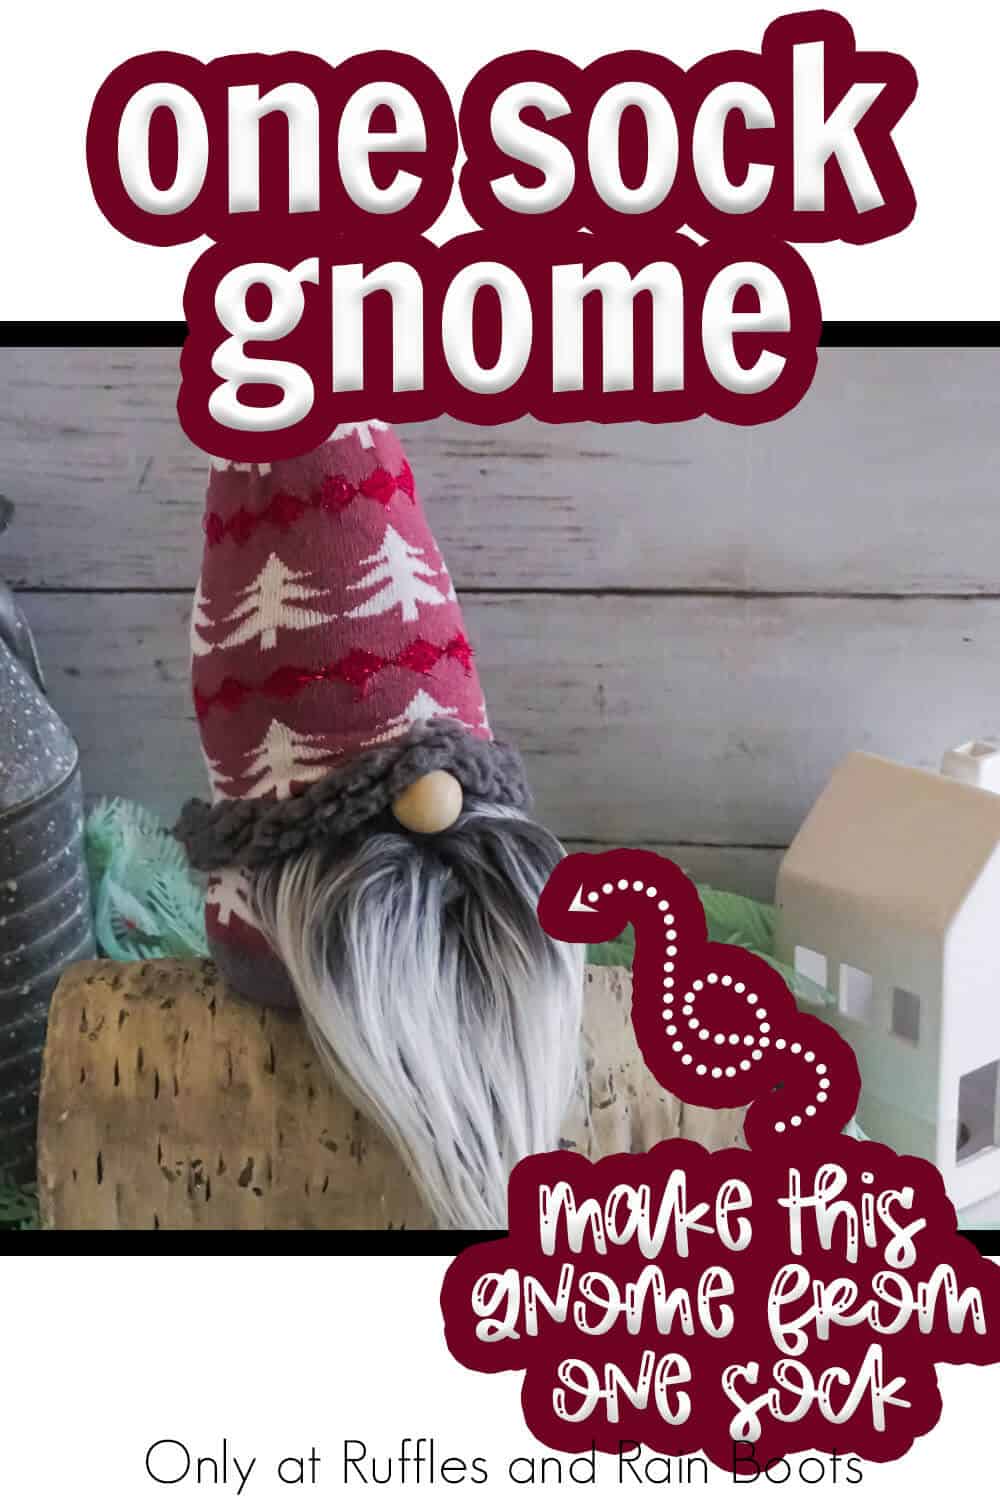 diy gnome you can make fast with text which reads one sock gnome make this gnome from one sock